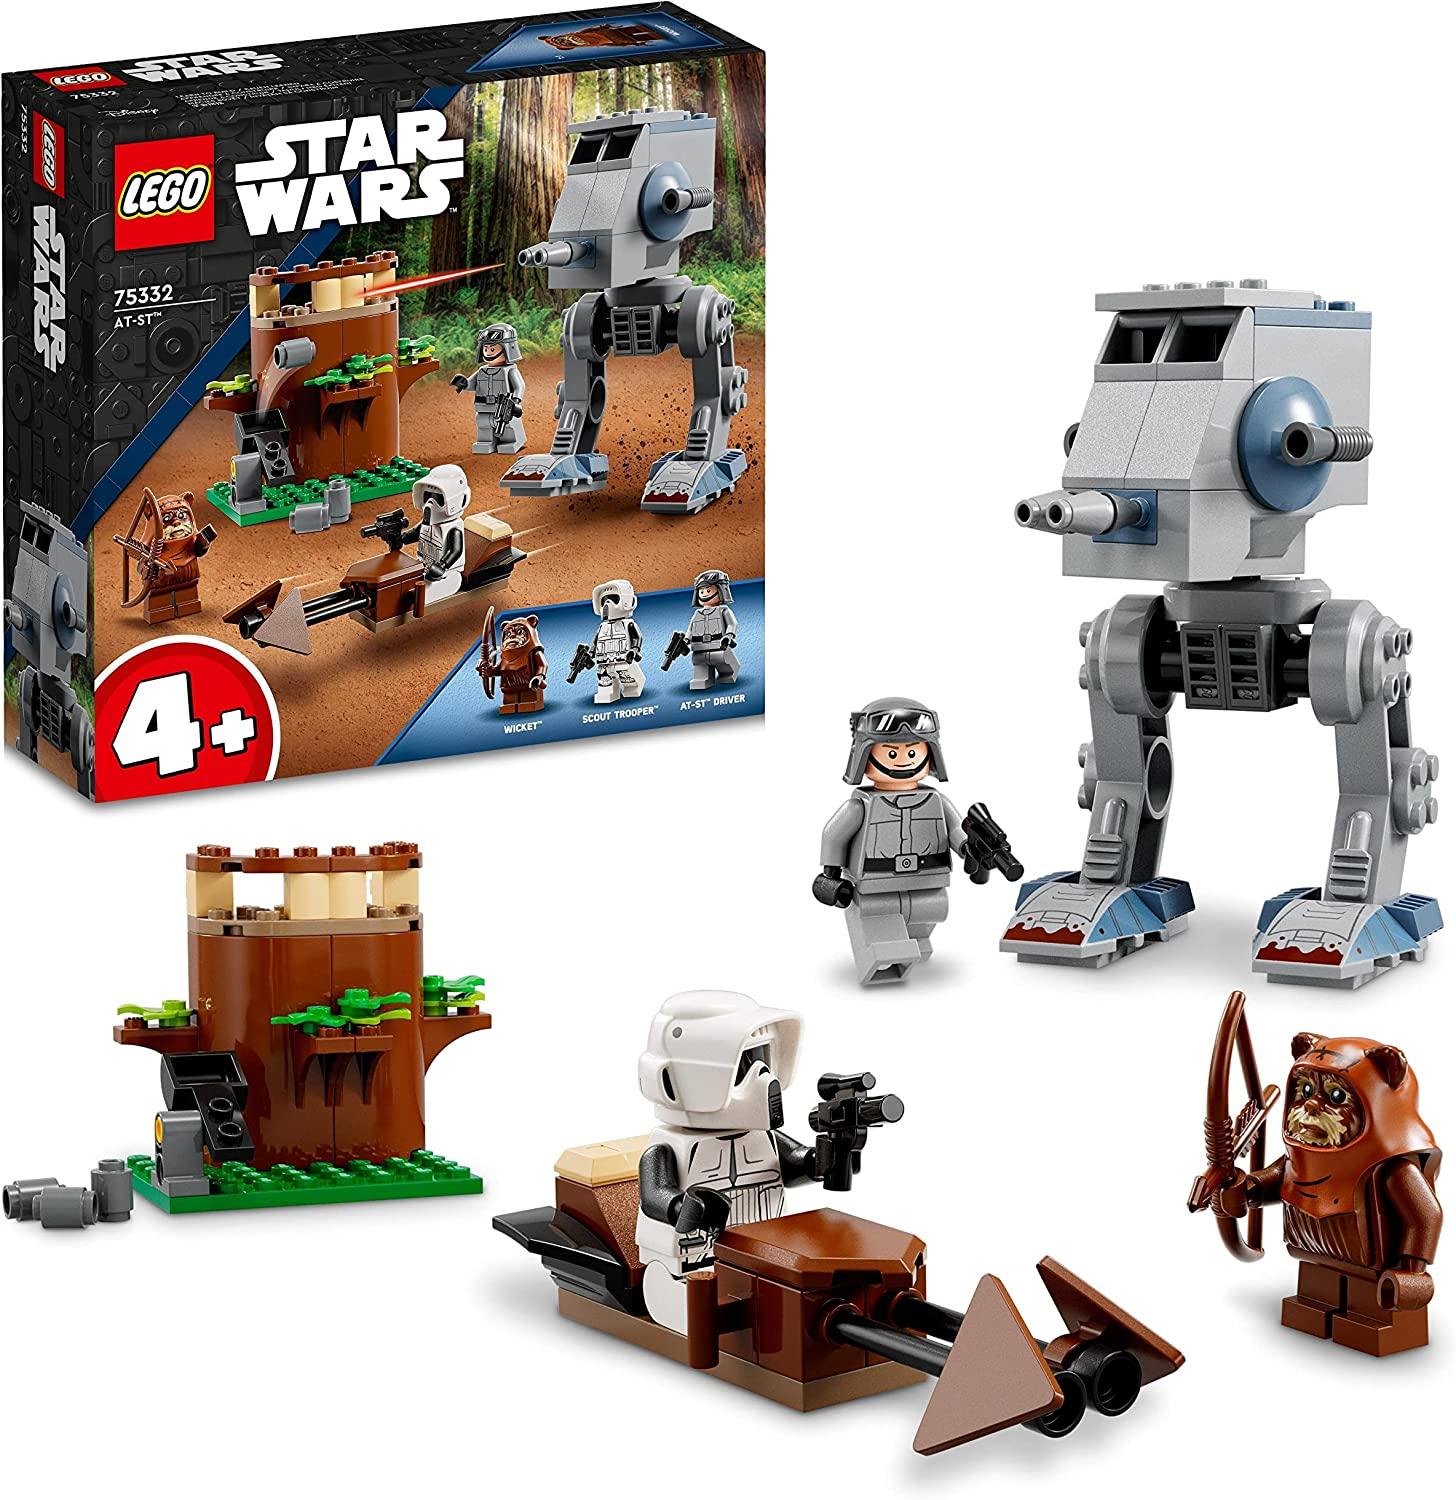 LEGO Star Wars 75332 - AT-ST